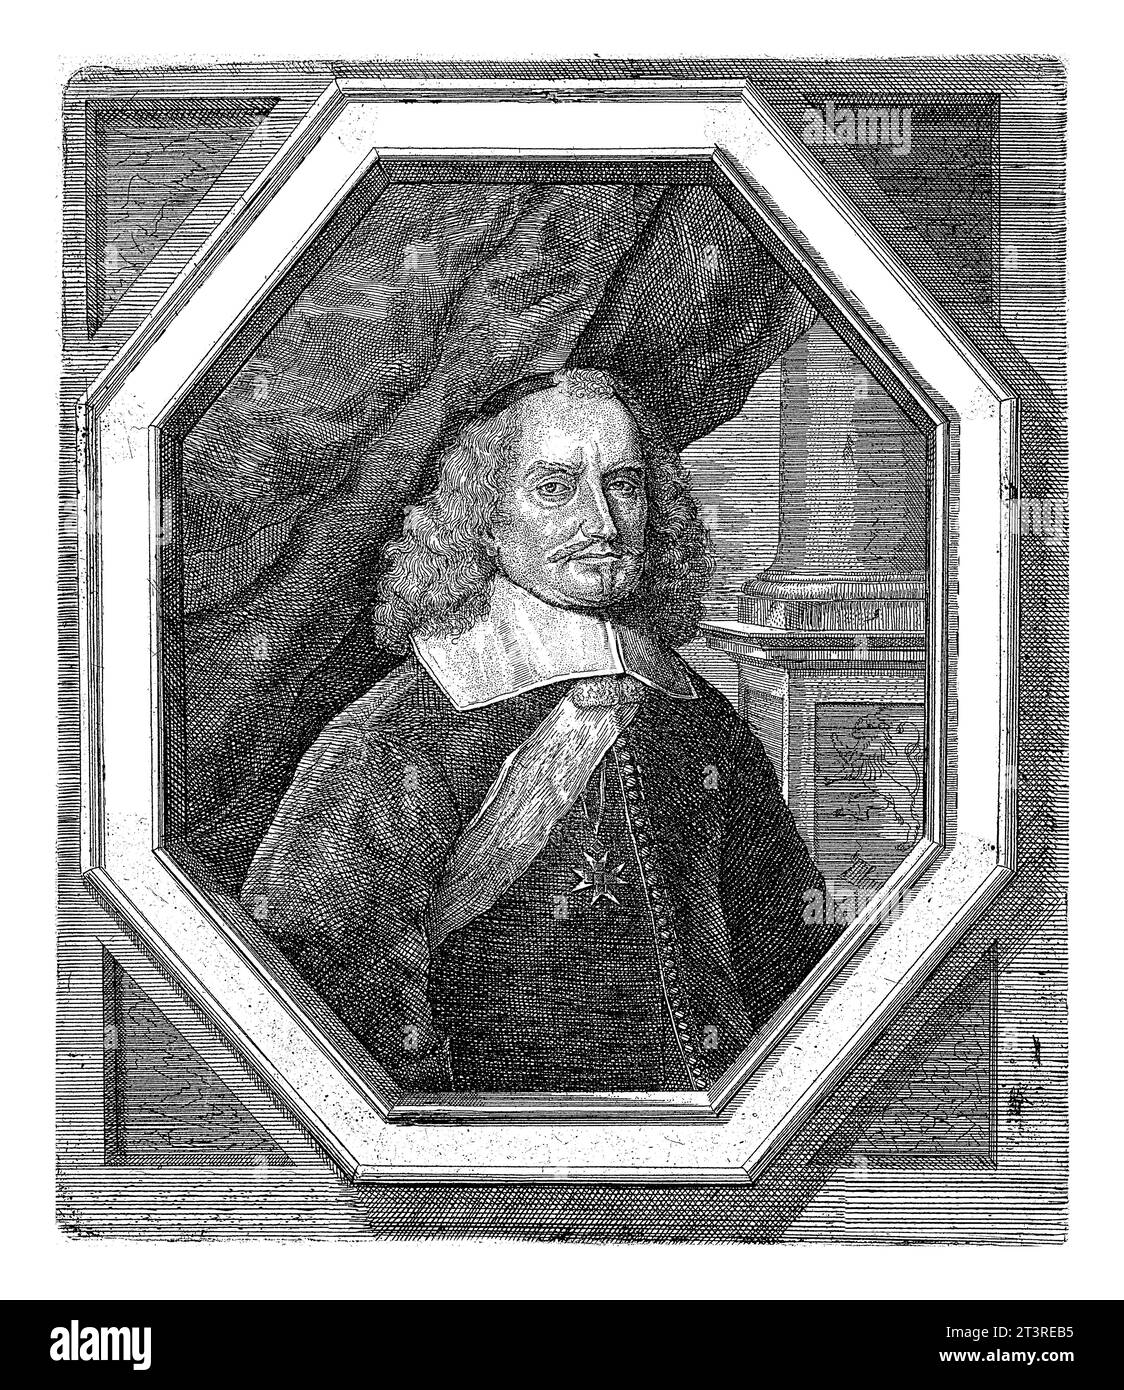 Portrait of Johan Maurits, Count of Nassau-Siegen, Johann Andreas Graff, 1627 - 1681 Portrait of Johan Maurits in an octagonal frame with edge letteri Stock Photo